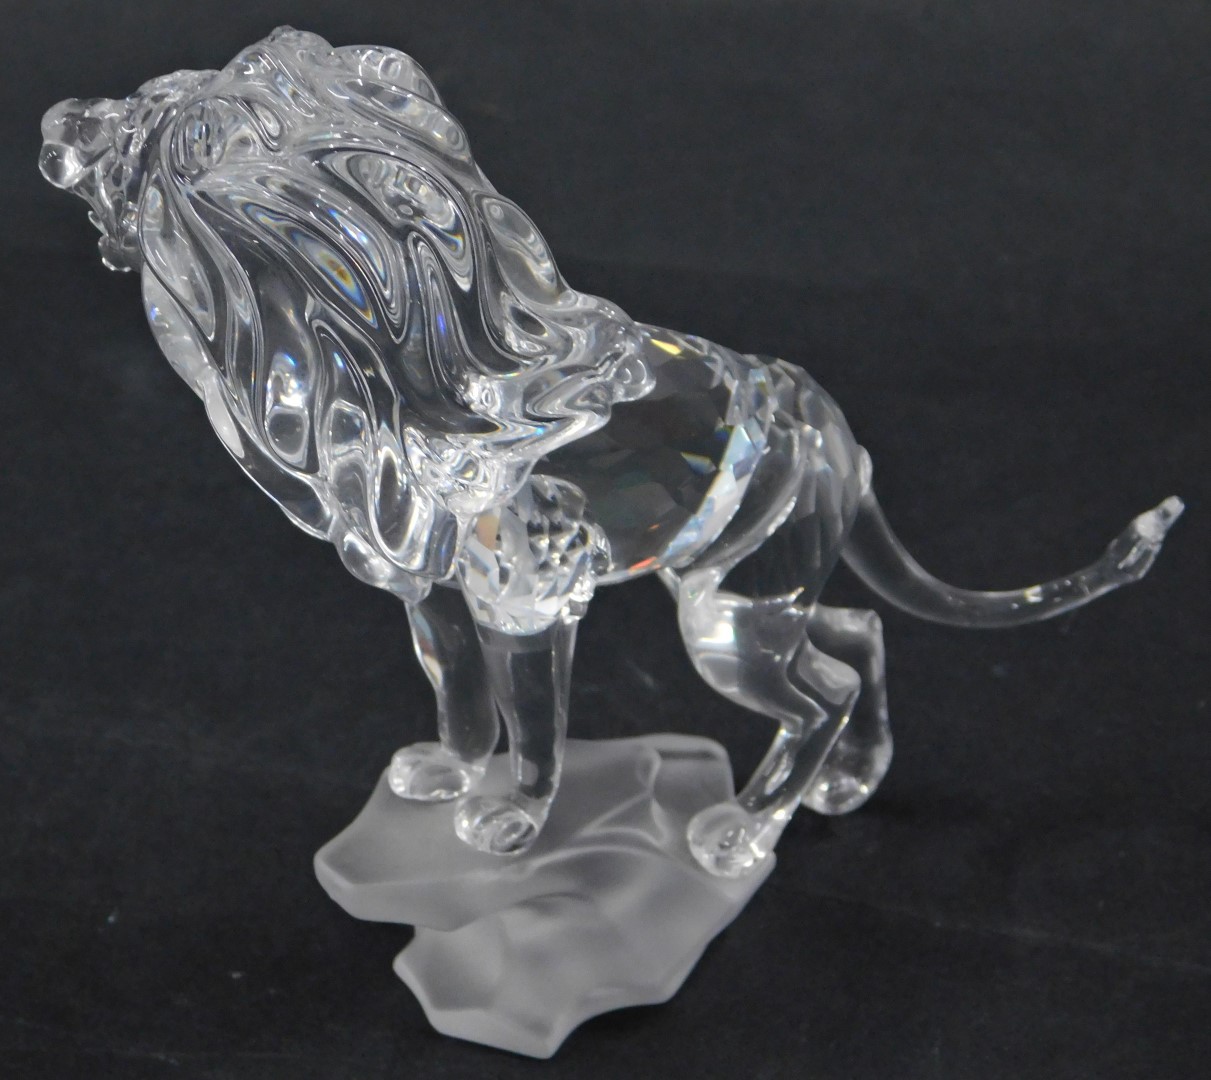 A Swarovski crystal figure group of a roaring lion, on rocked perch, 13cm high, boxed with certifica - Image 2 of 3